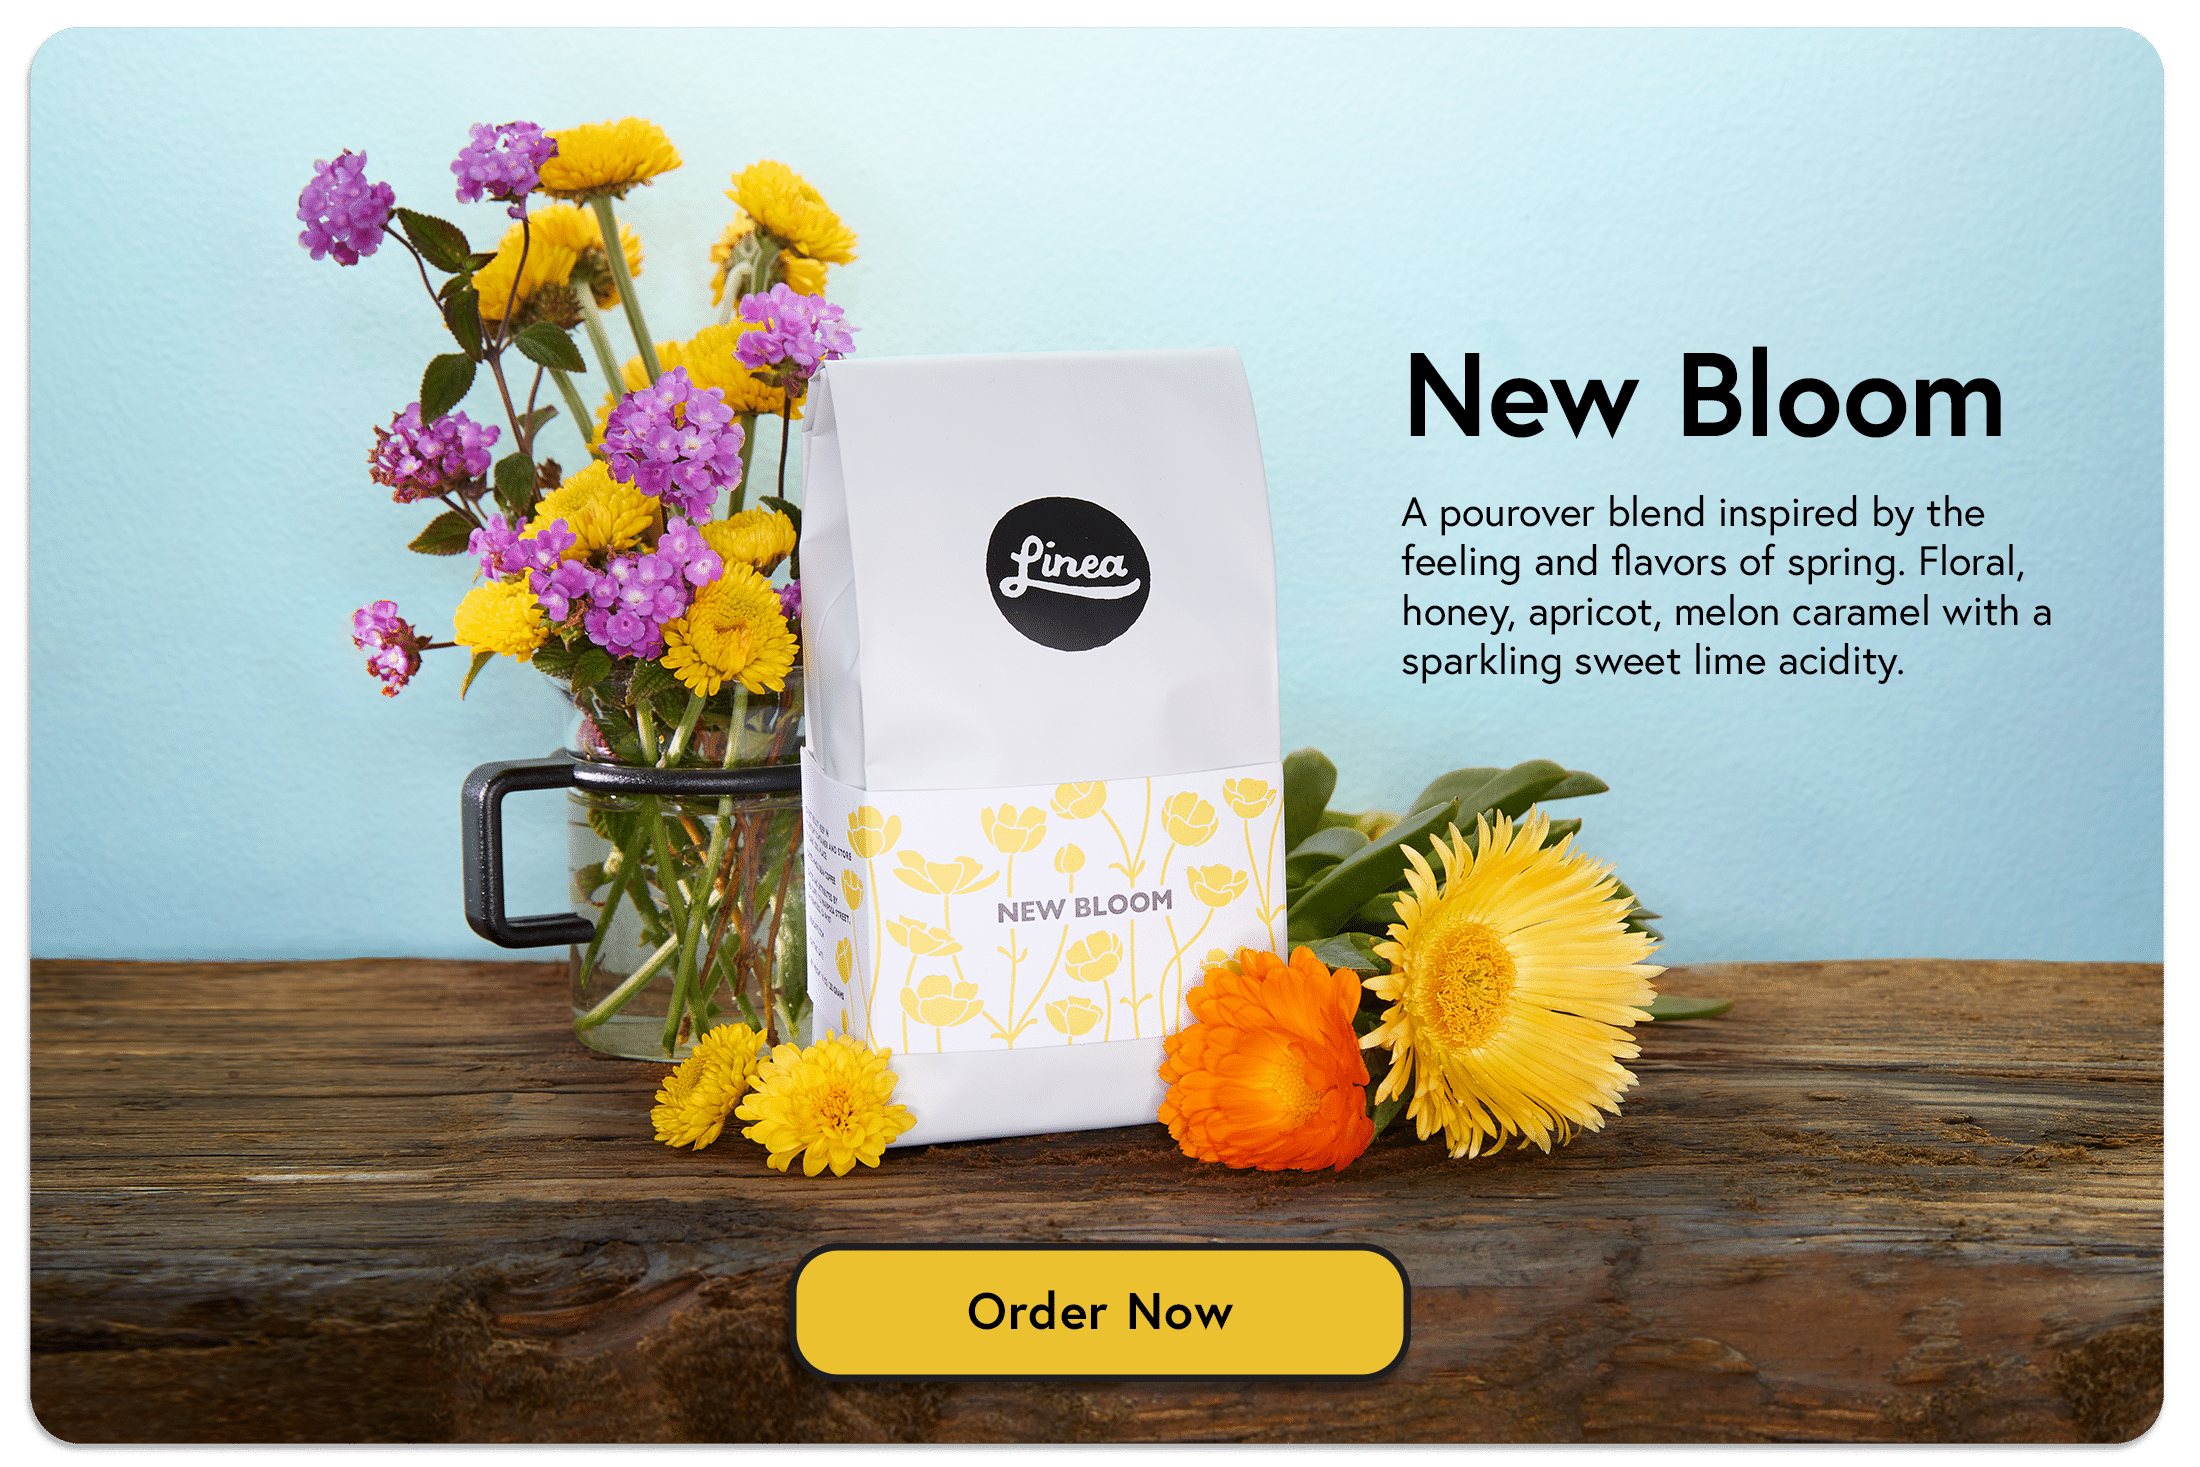 http://lineacaffe.com/wp-content/uploads/2021/05/New-Bloom-Ad.png